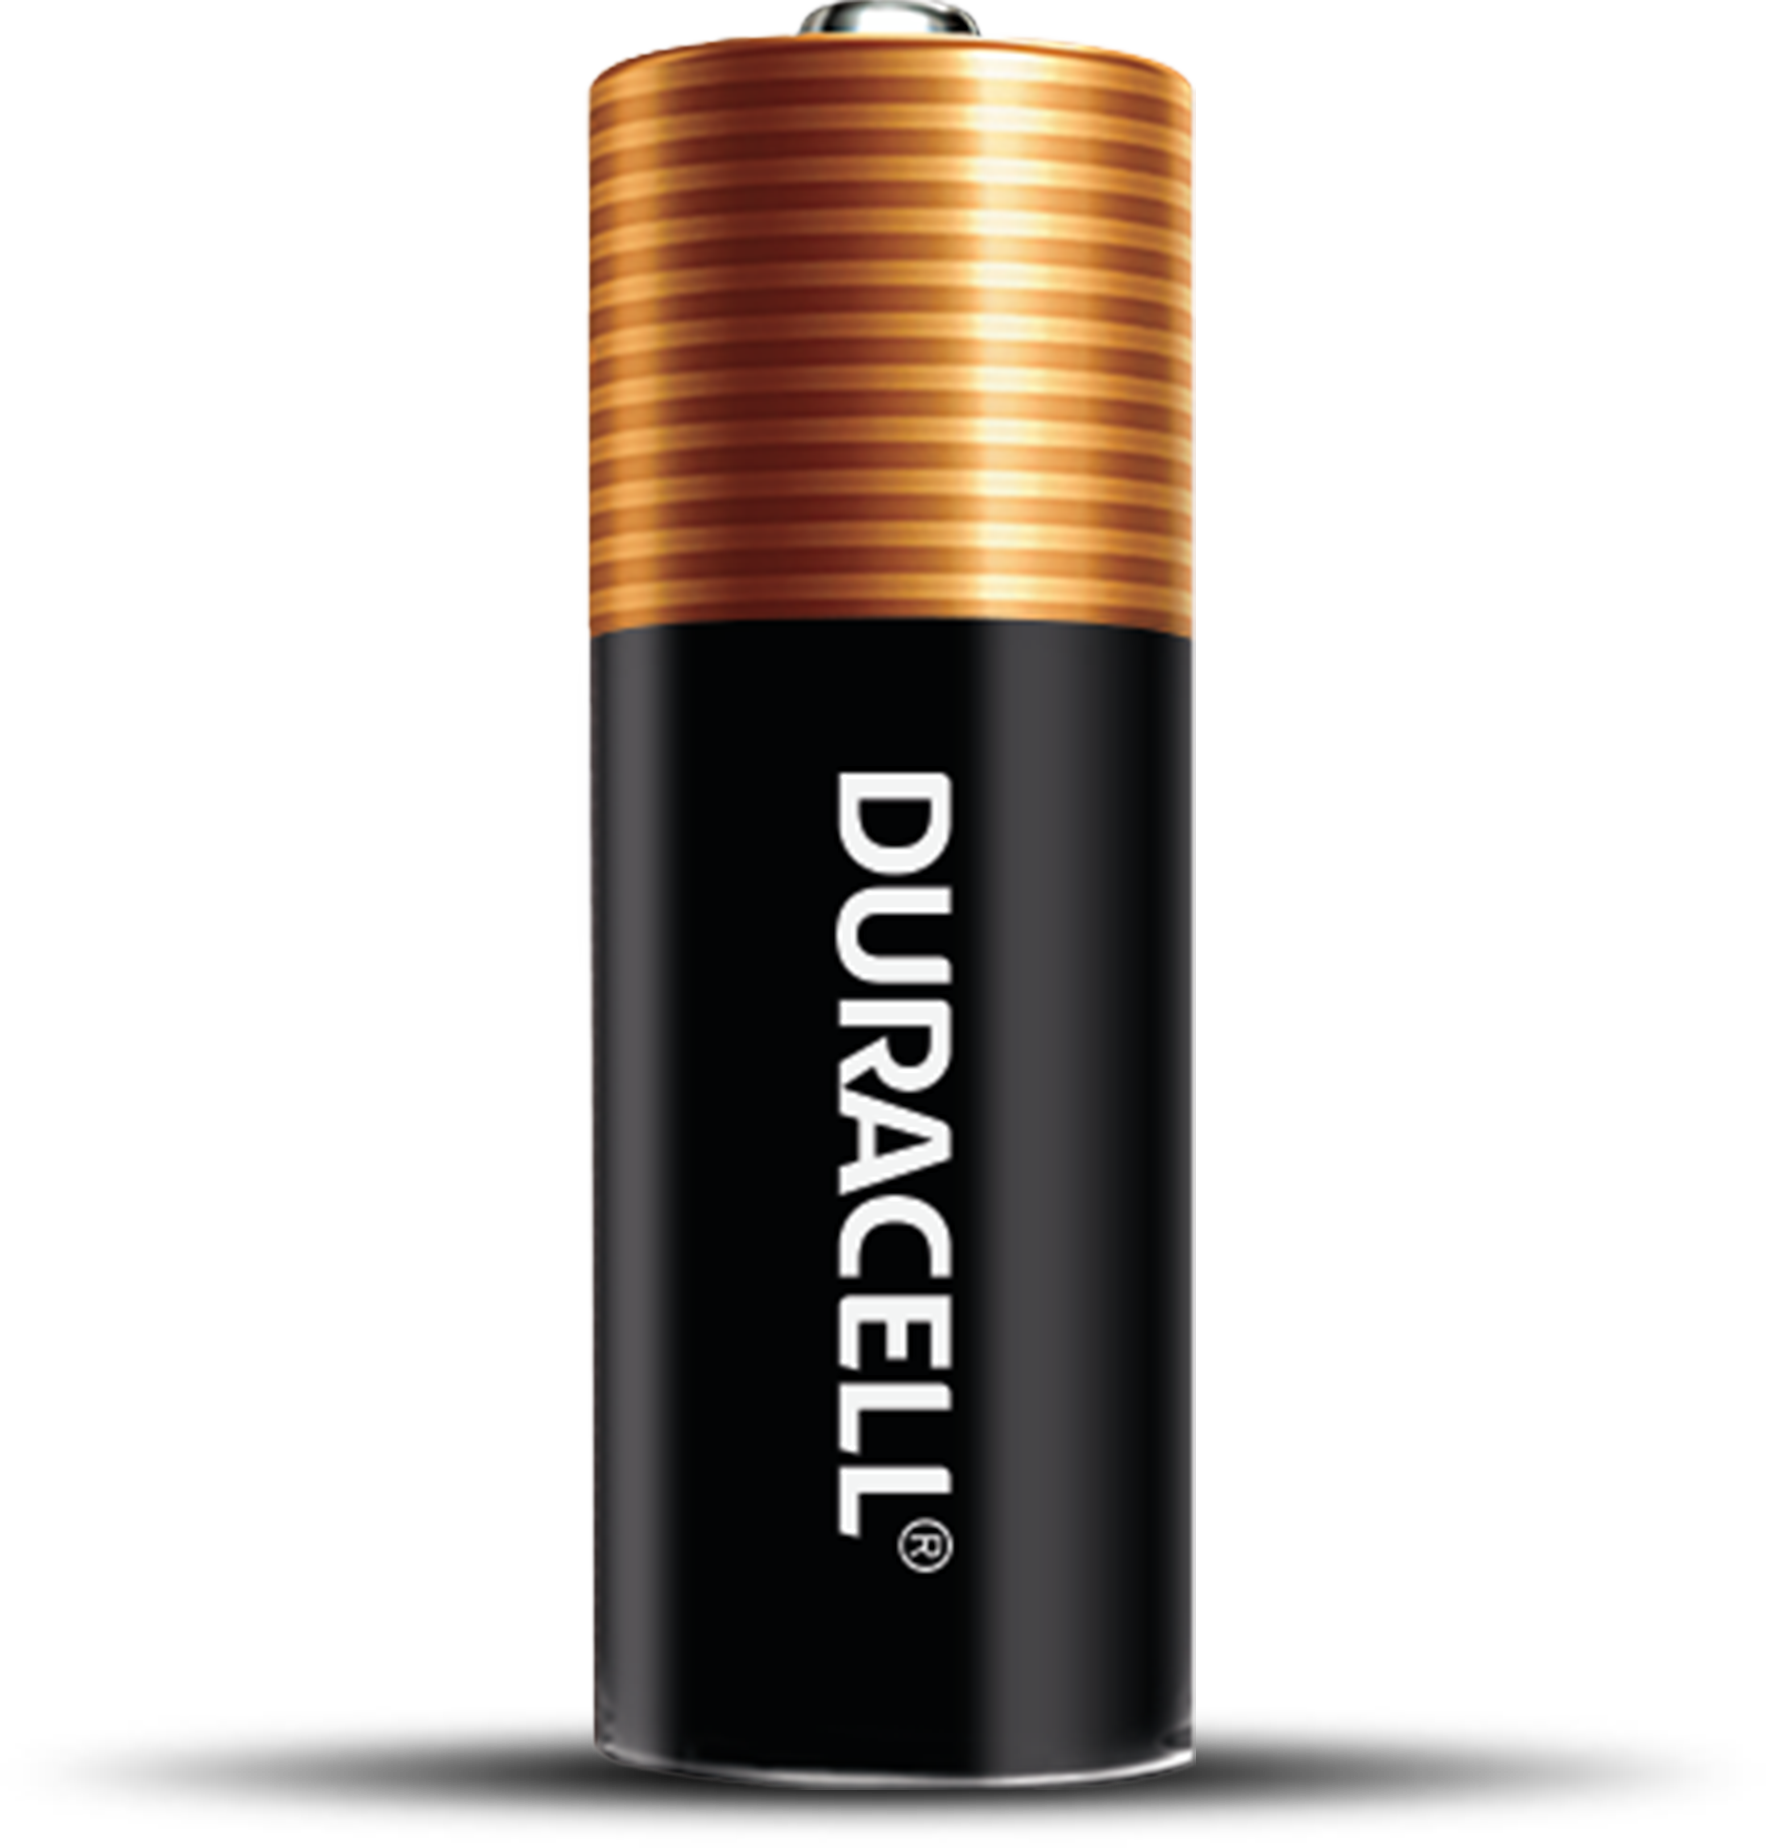 https://www.duracell.com/wp-content/uploads/2022/06/eContent-PI-Duracell_Renders_21_23_Boost_Battery_Cell.png